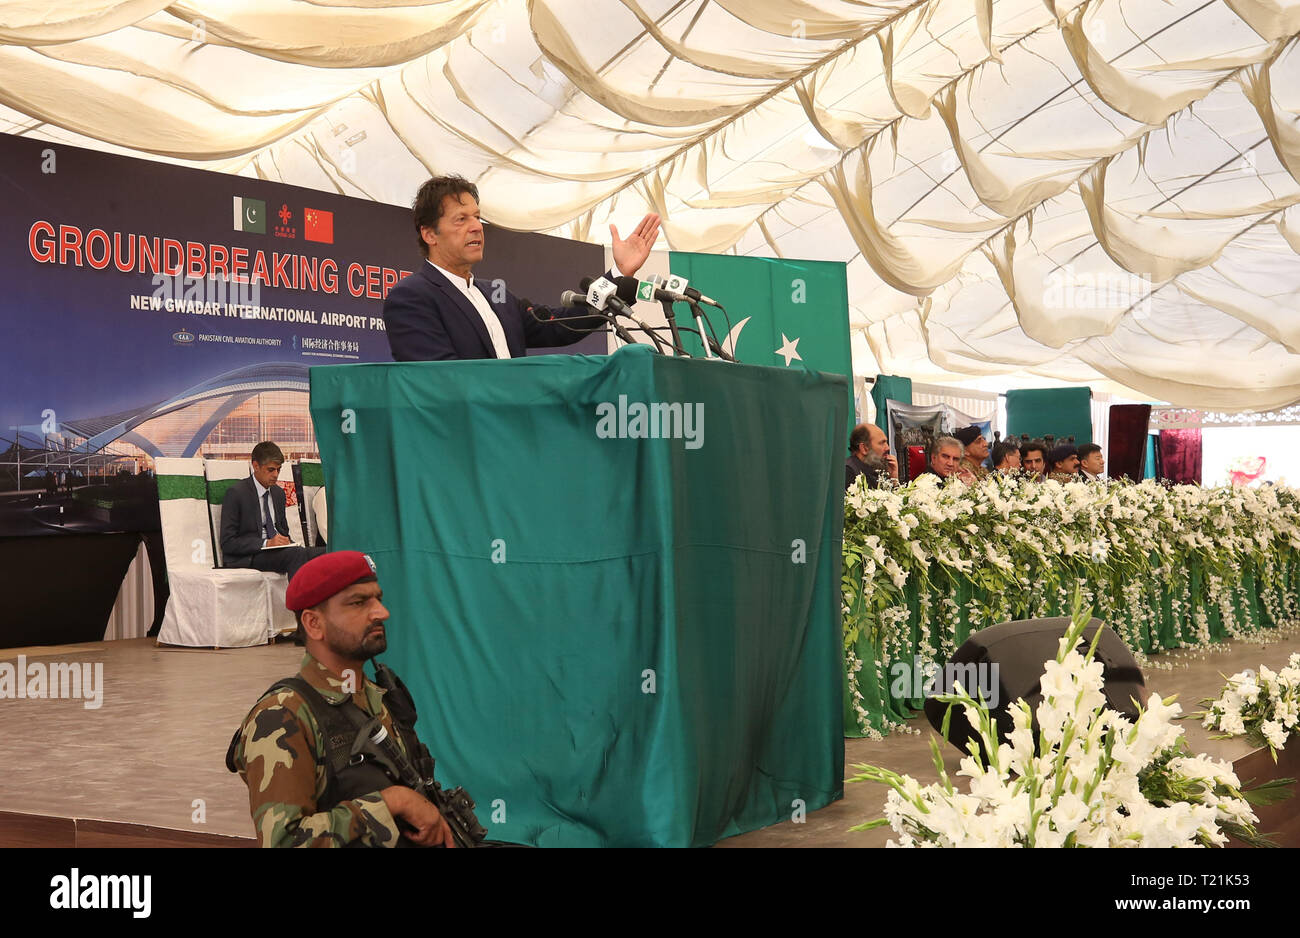 Gwadar, Pakistan. 29th Mar, 2019. Pakistani Prime Minister Imran Khan addresses the ground breaking ceremony of the new Gwadar International Airport Project in Gwadar, Pakistan, on March 29, 2019. Pakistan broke ground for the construction of the China-funded new Gwadar International Airport on Friday, which would link Pakistan's fast-rising southwest Gwadar port city with the rest of the world. Credit: Liu Tian/Xinhua/Alamy Live News Stock Photo